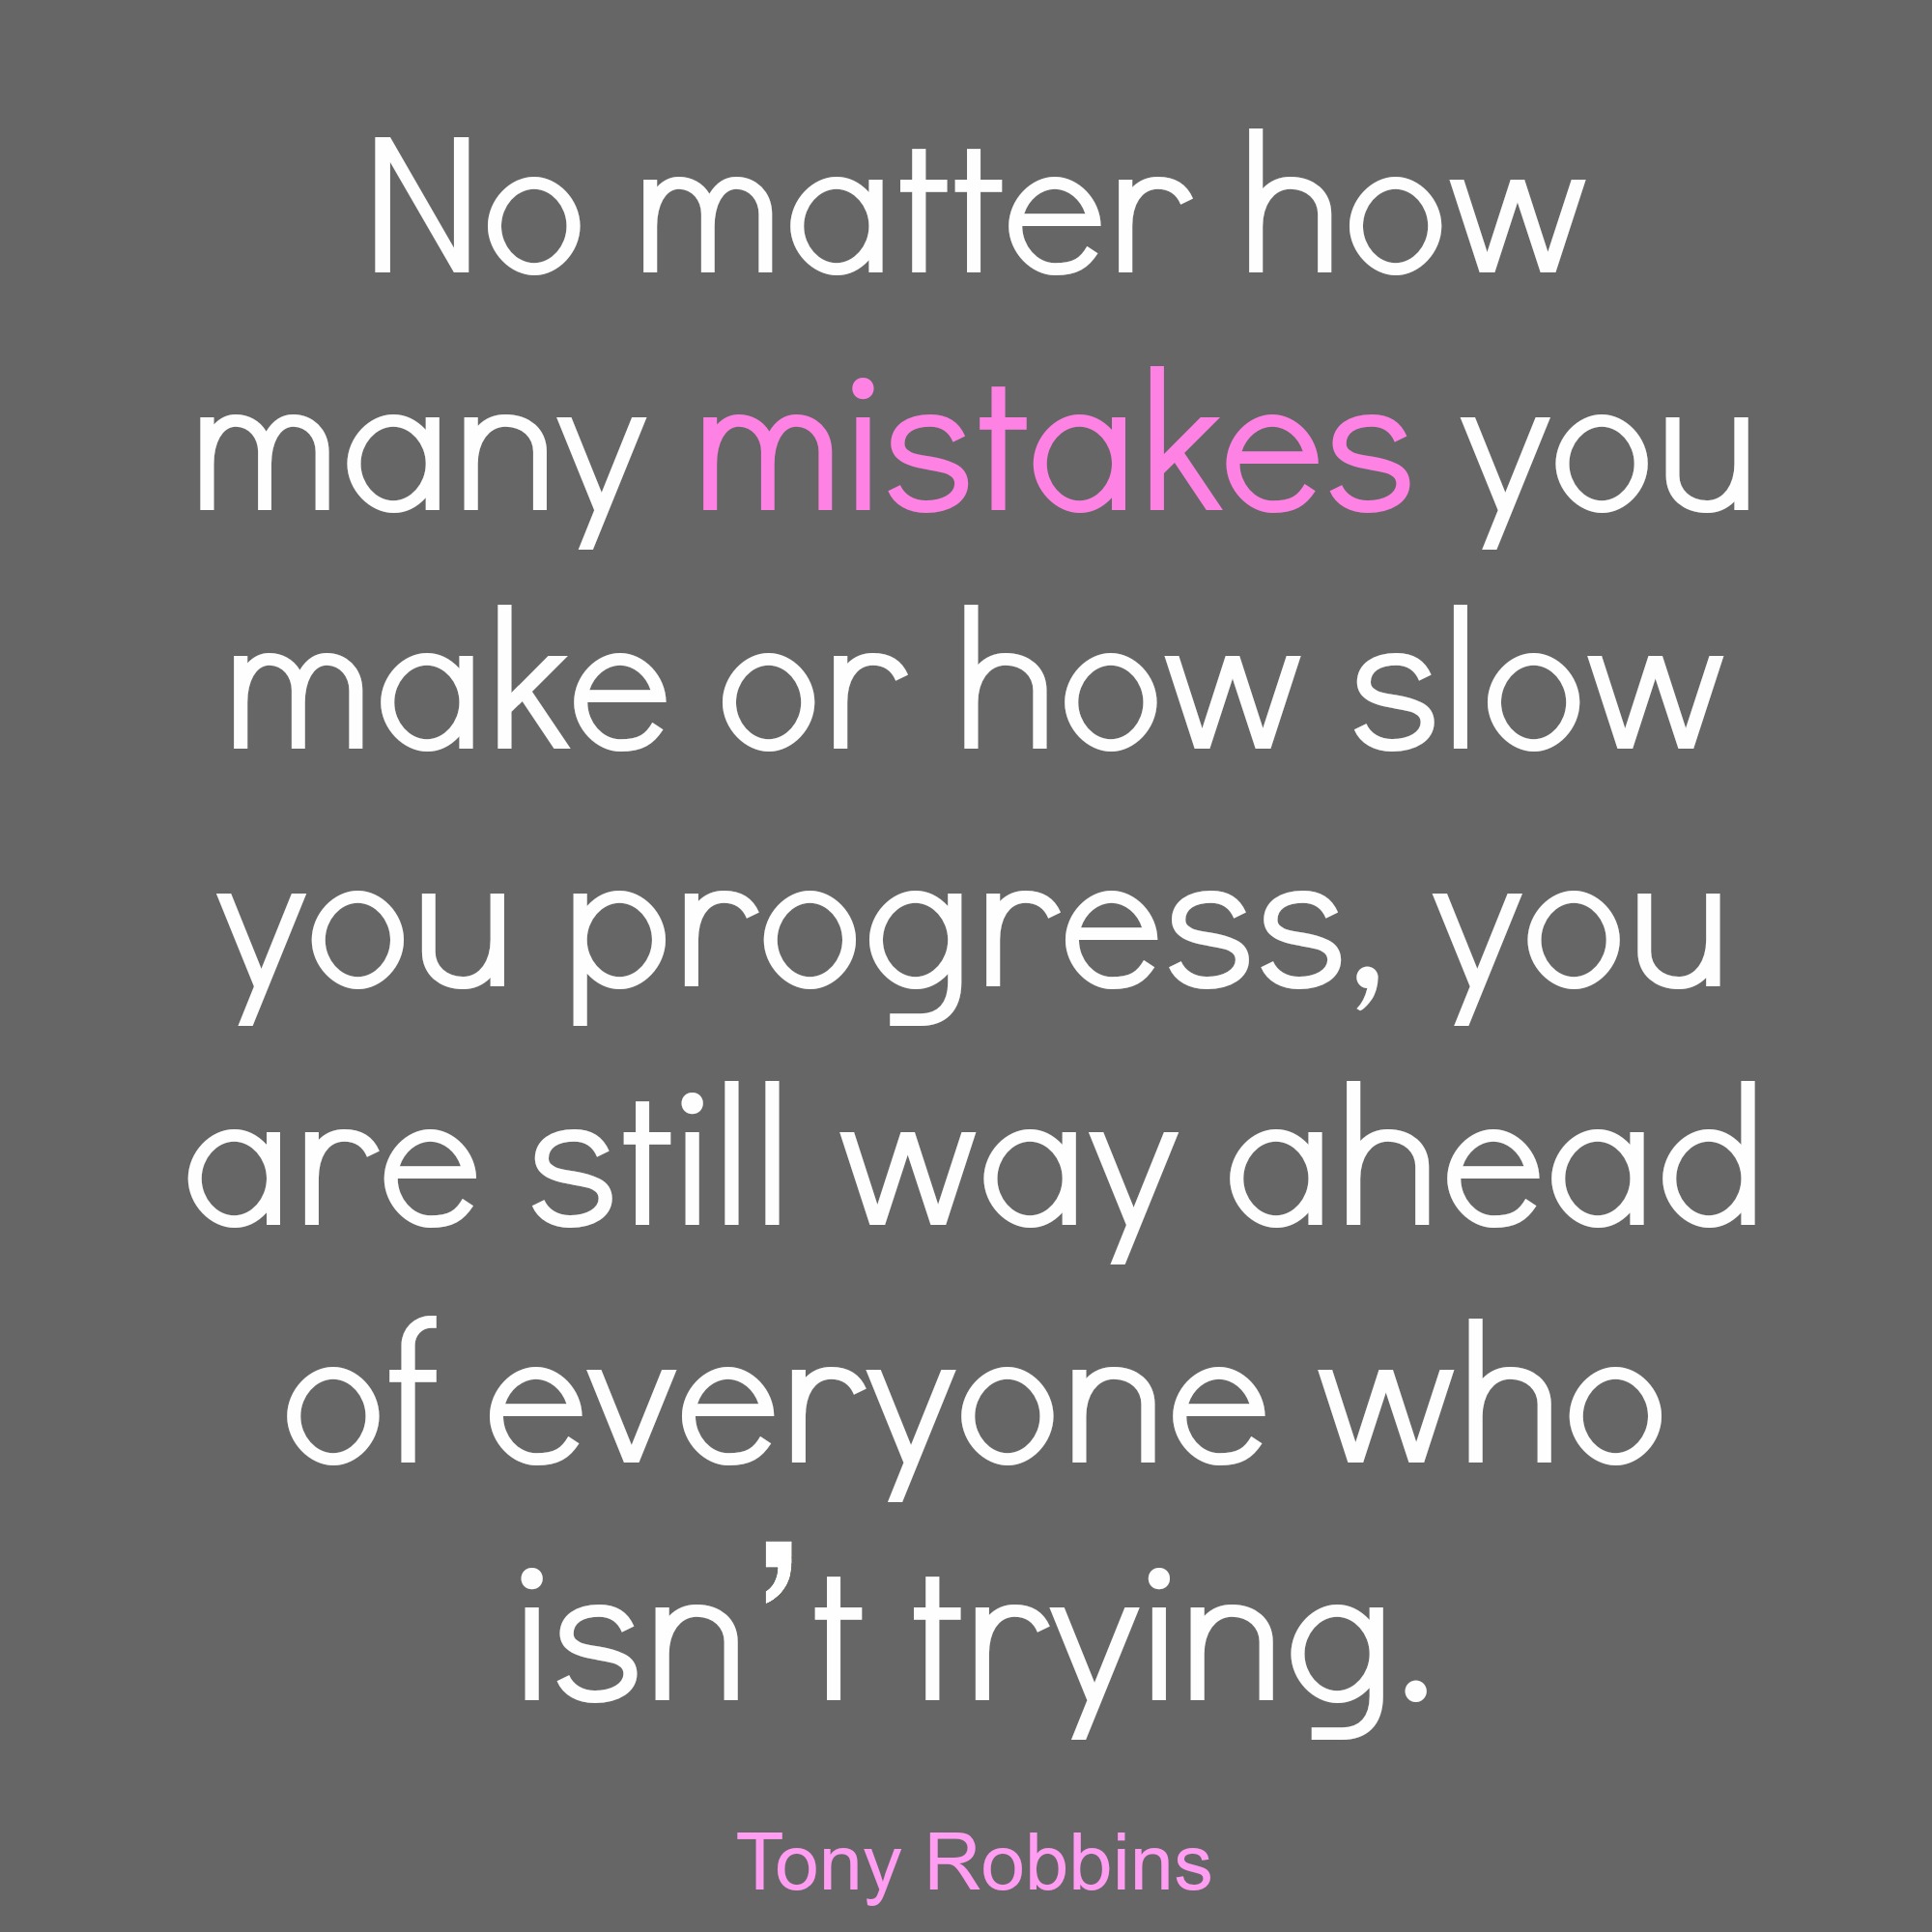 No matter how many mistakes you make or how slow you progress you are still